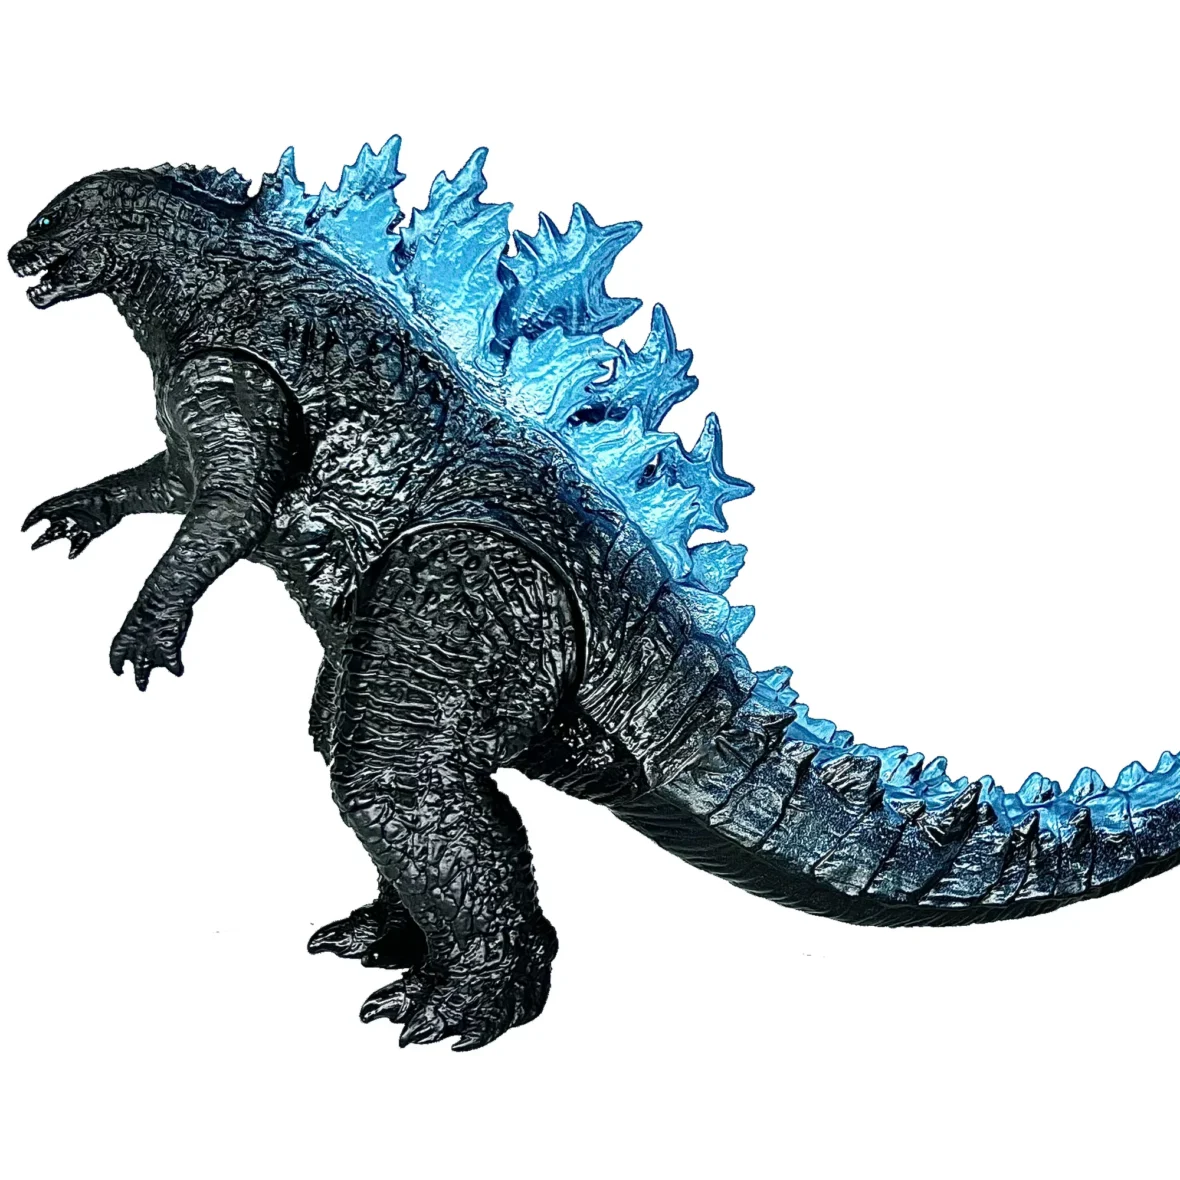 Godzilla vs. Kong 2021 Toy Action Figure: Godzilla King of The Monsters, Movie Series Movable Joints